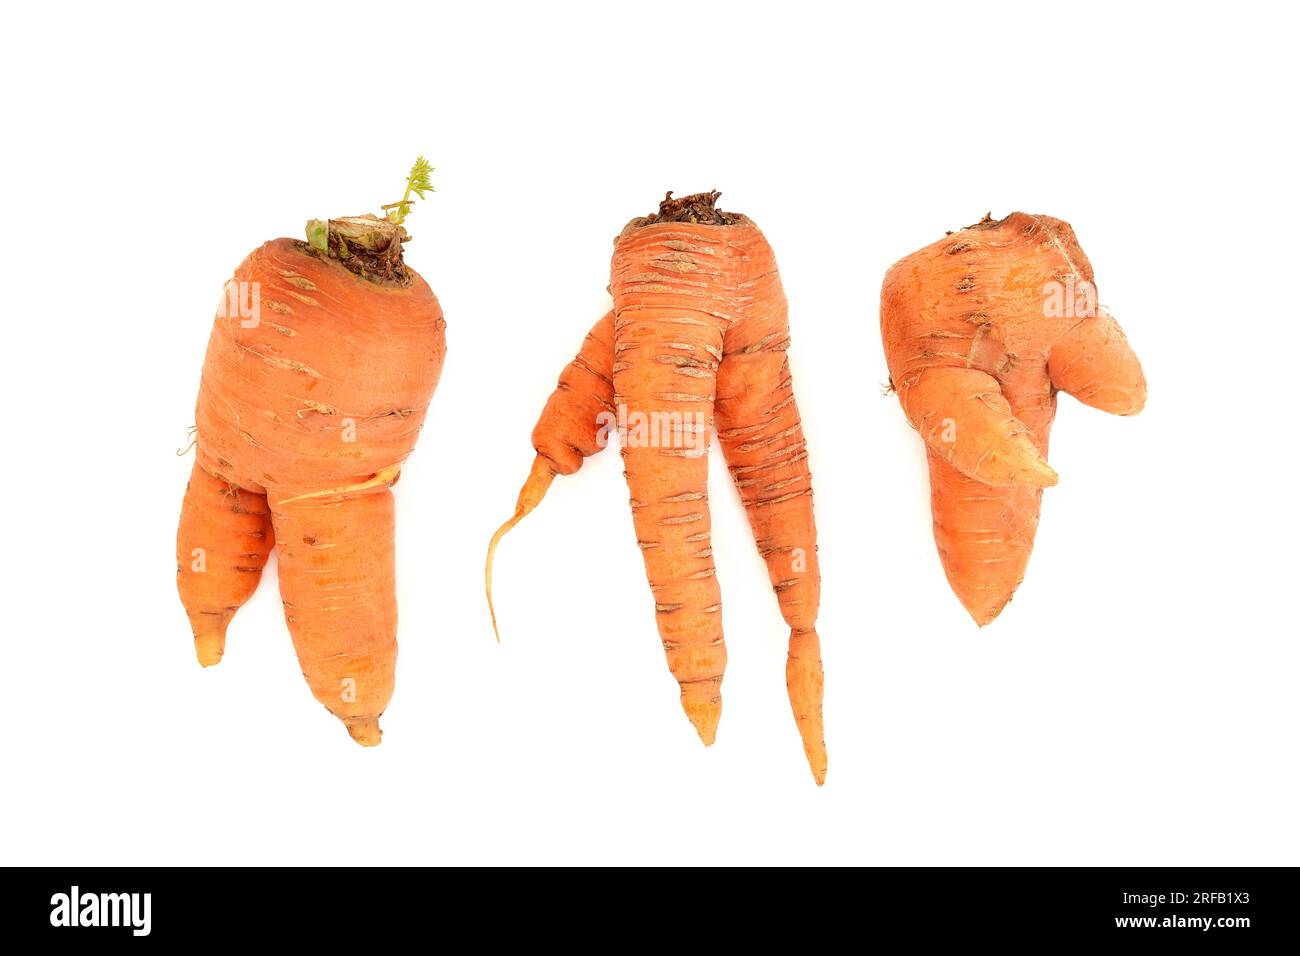 Twisted forked deformed and misshapen carrots. Organic imperfect examples on white background. Caused by pythium fungus. Stock Photo